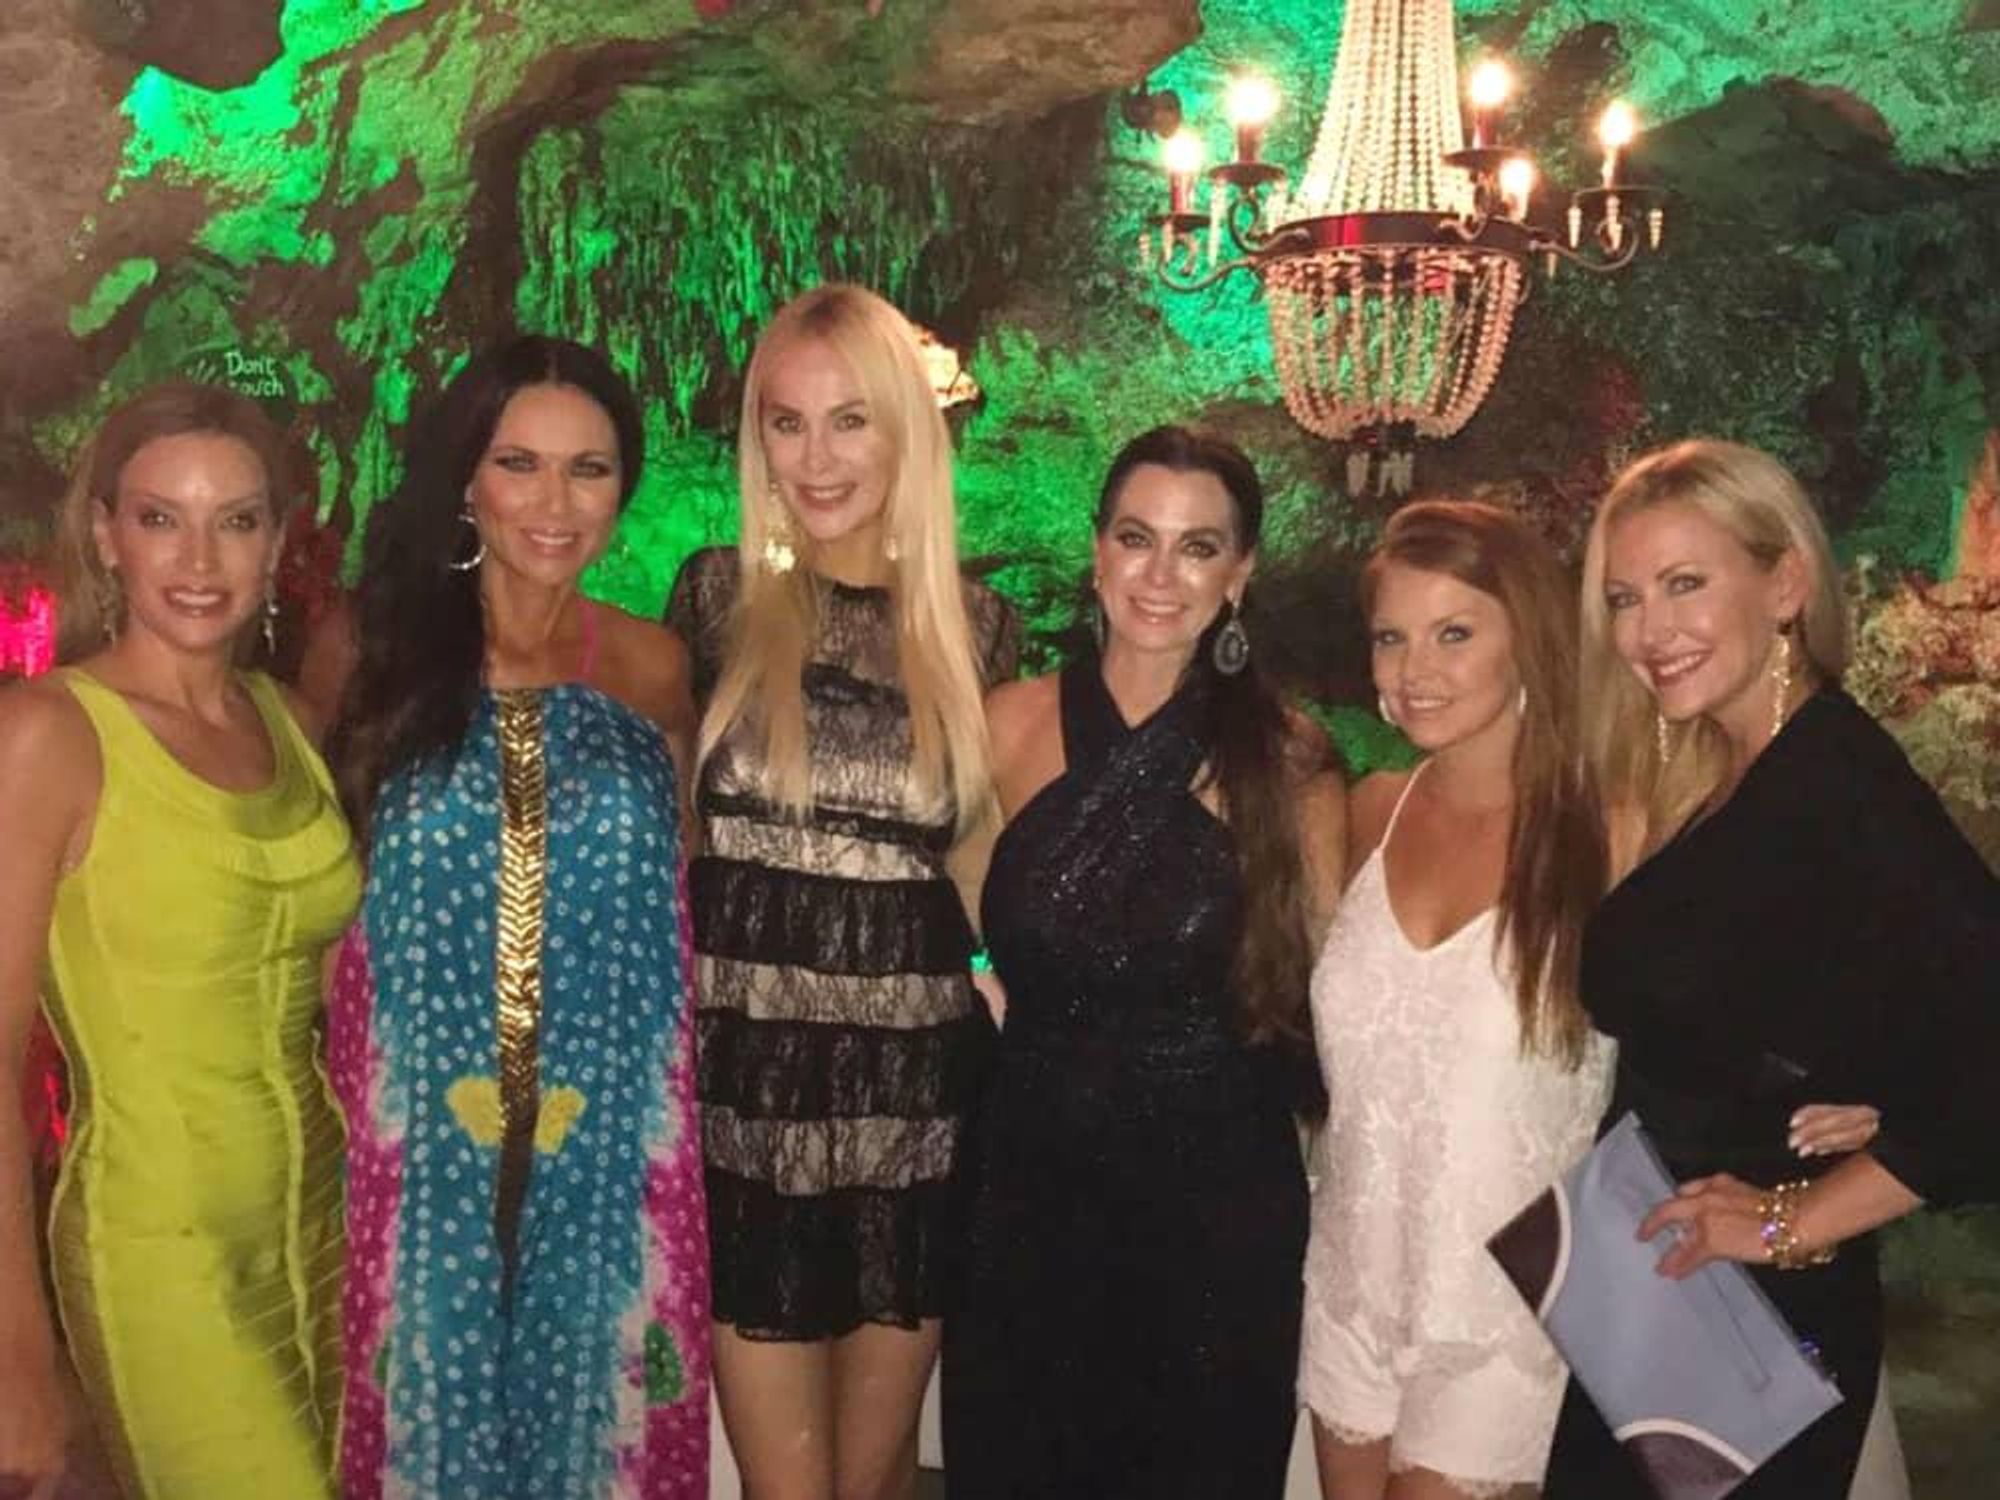 Cary, LeeAnne, Brandi, Stephanie, Kameron, and D'Andra of Real Housewives, Mexico cave